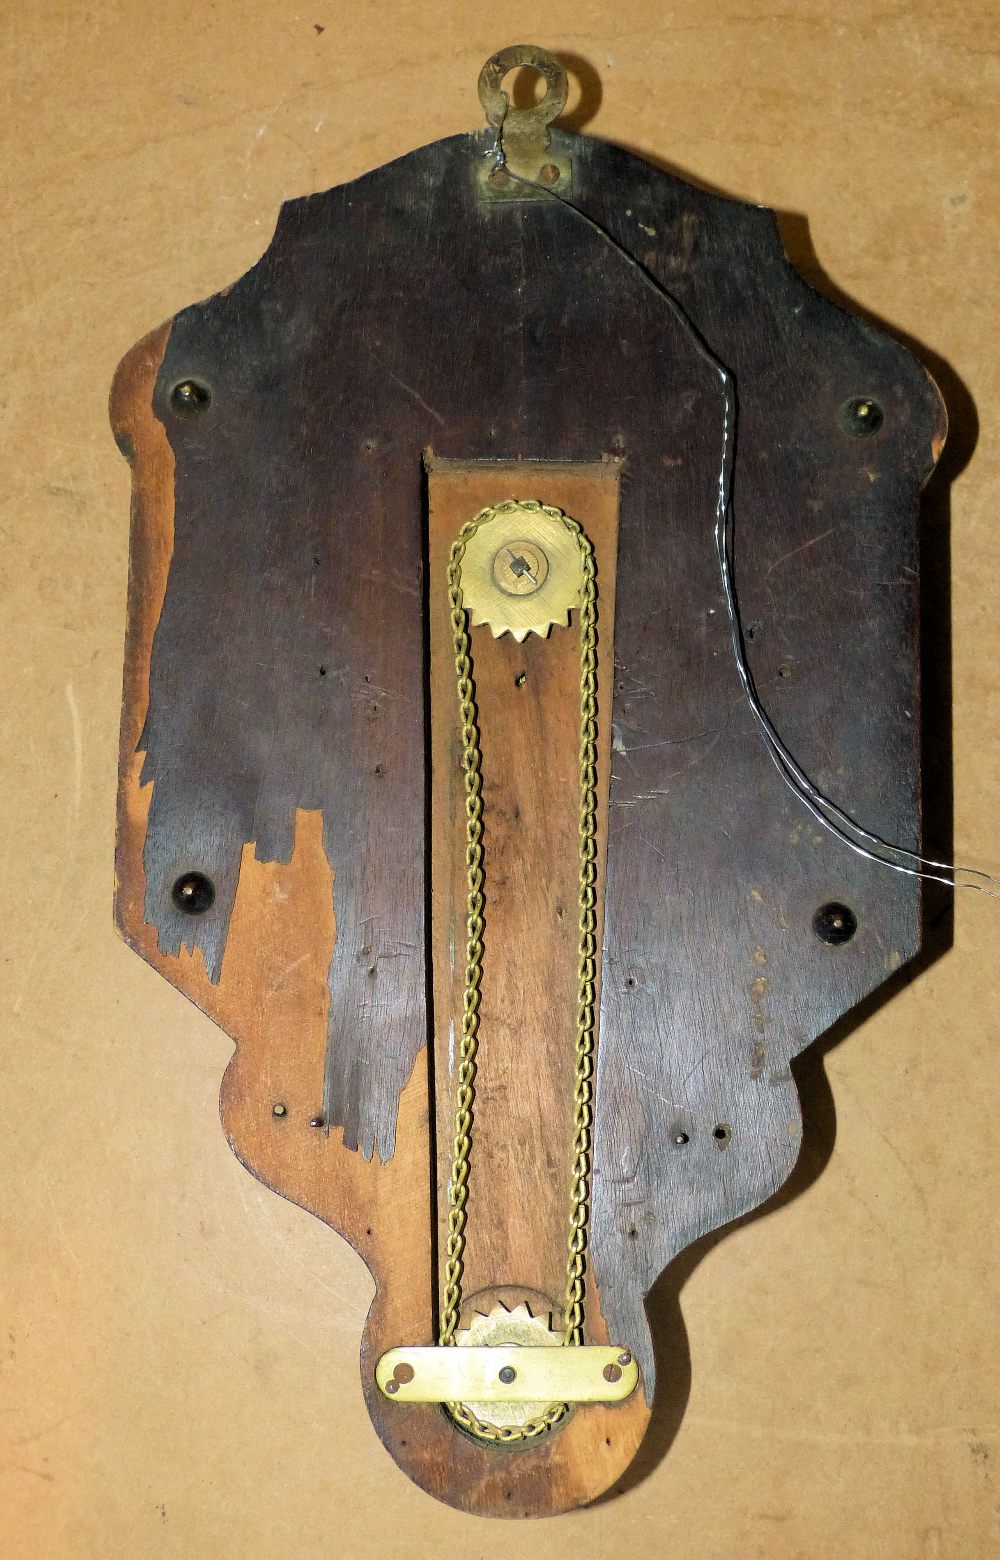 A Systeme Brevete Hanging Wall Clock on - Image 4 of 4